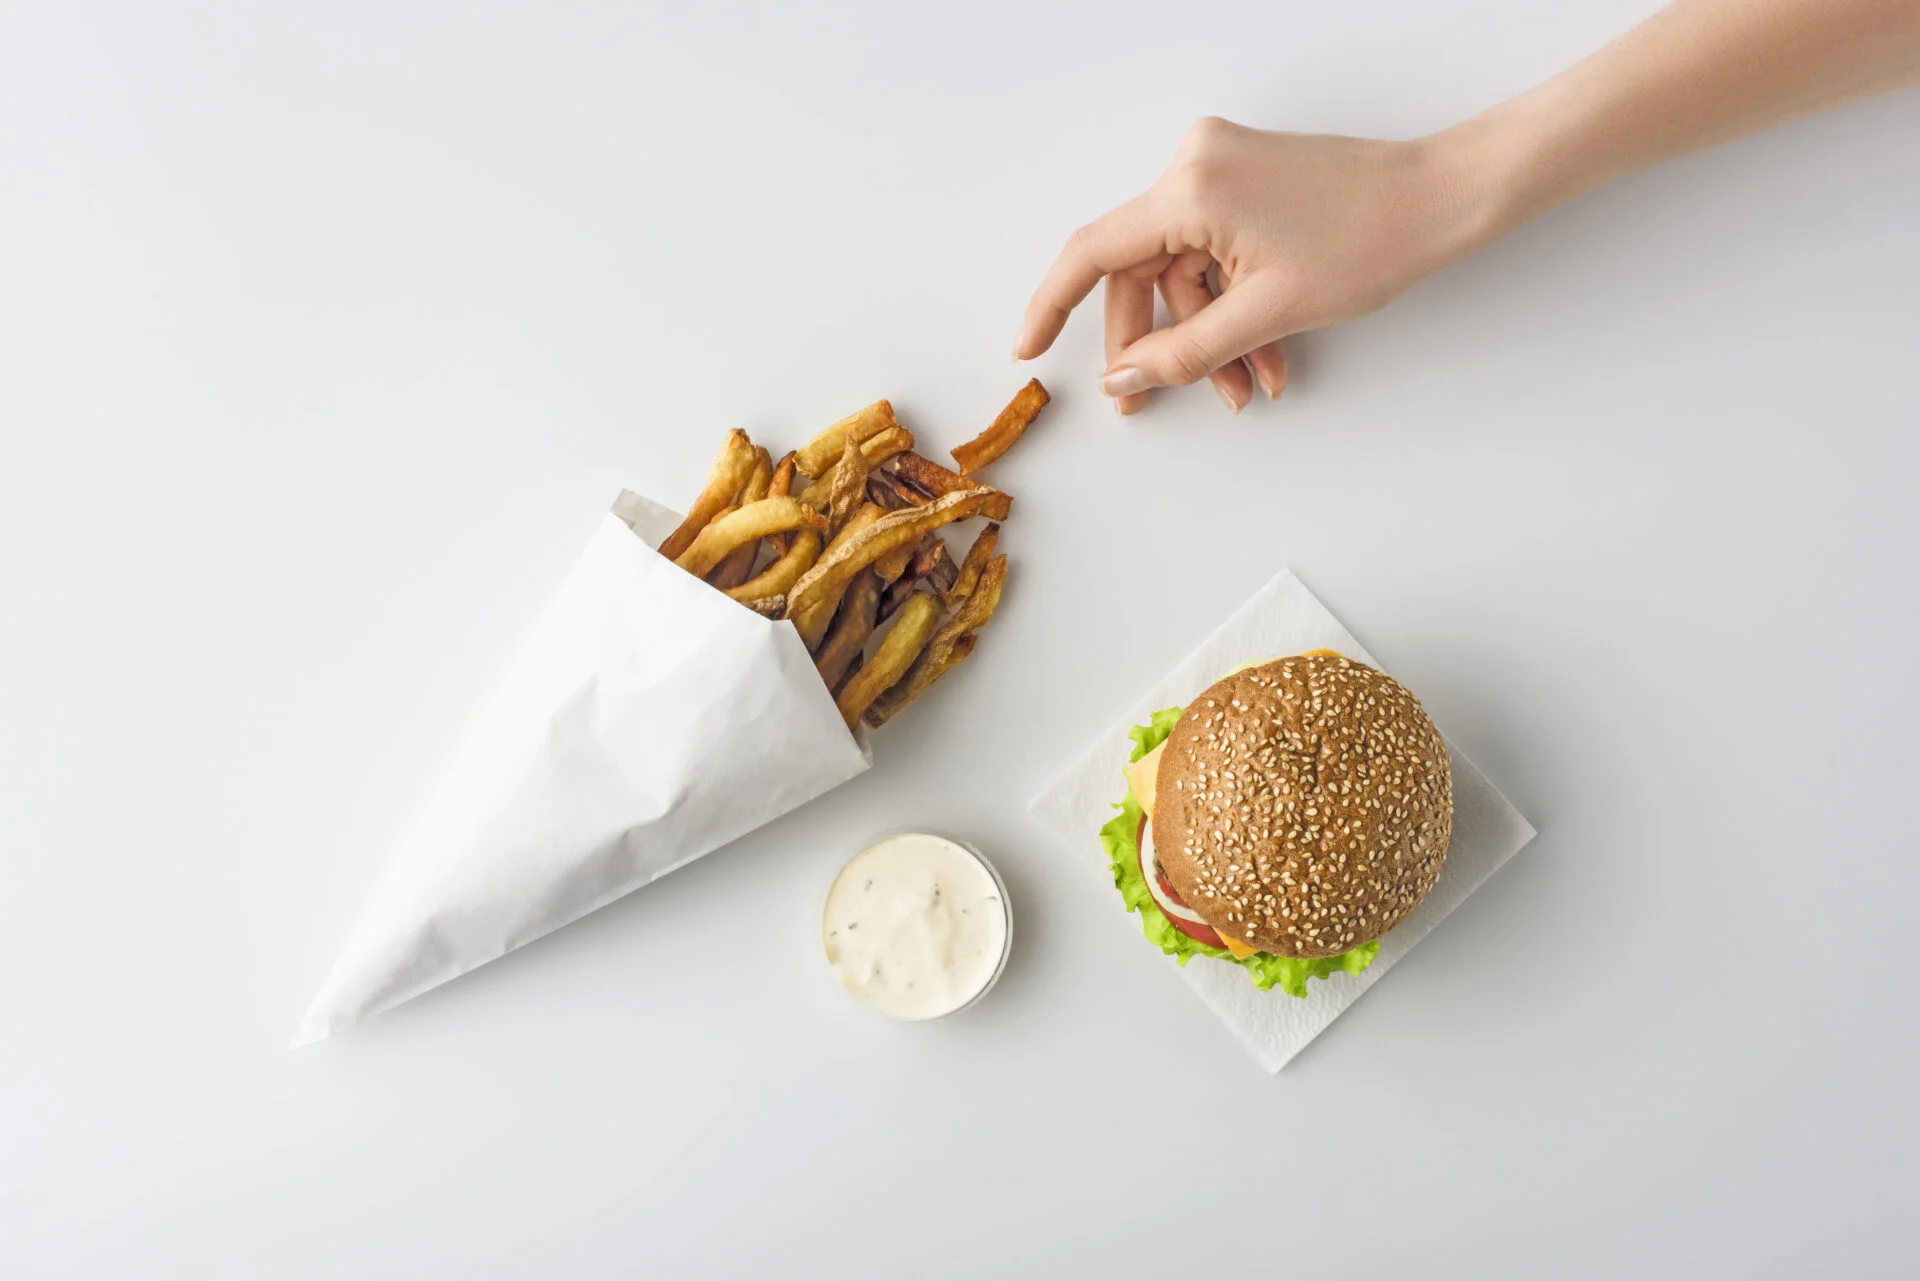 Fast Food burger and fries with PFAS in the food packaging